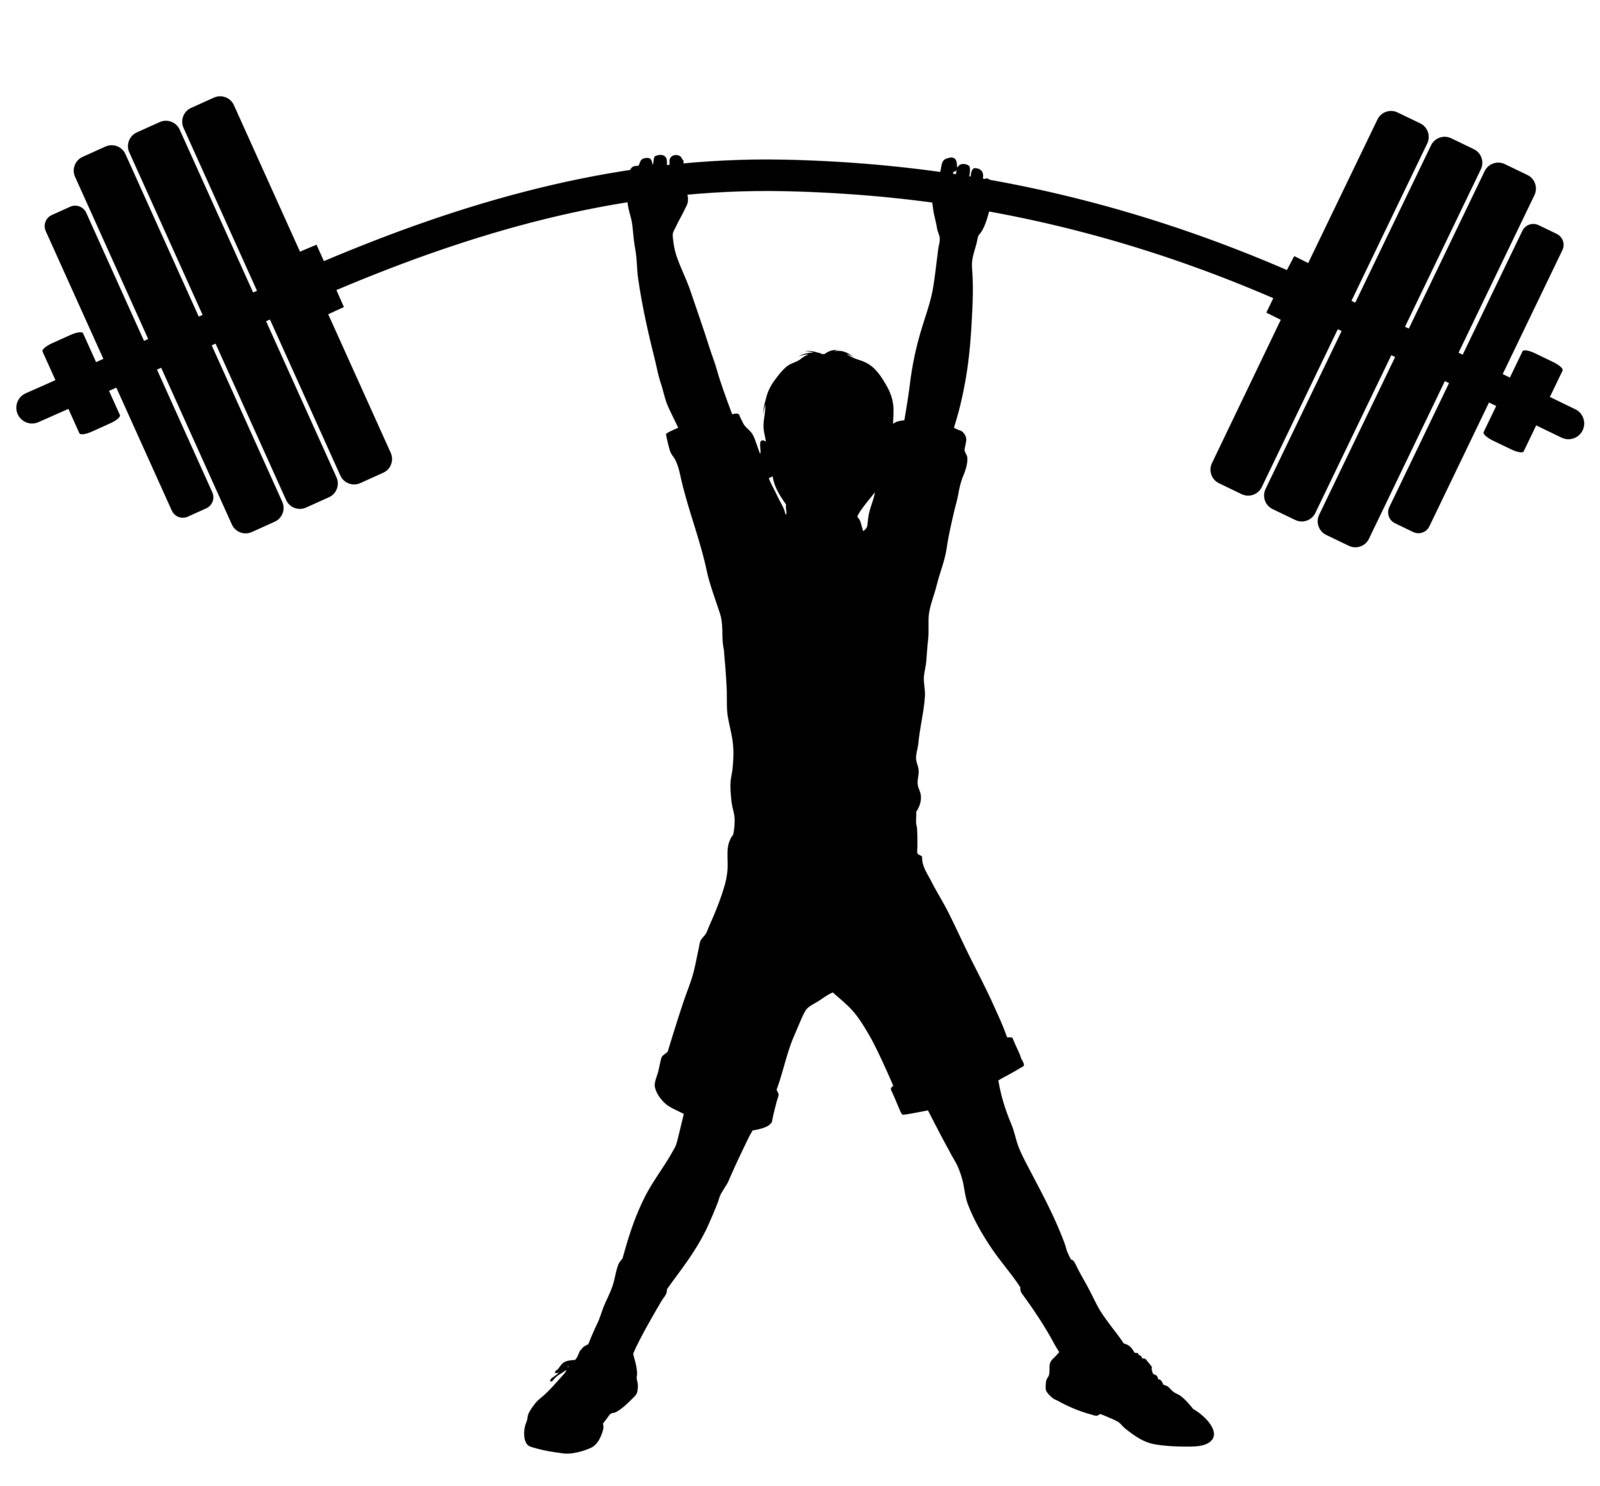 Editable vector silhouette of a boy lifting heavy weights